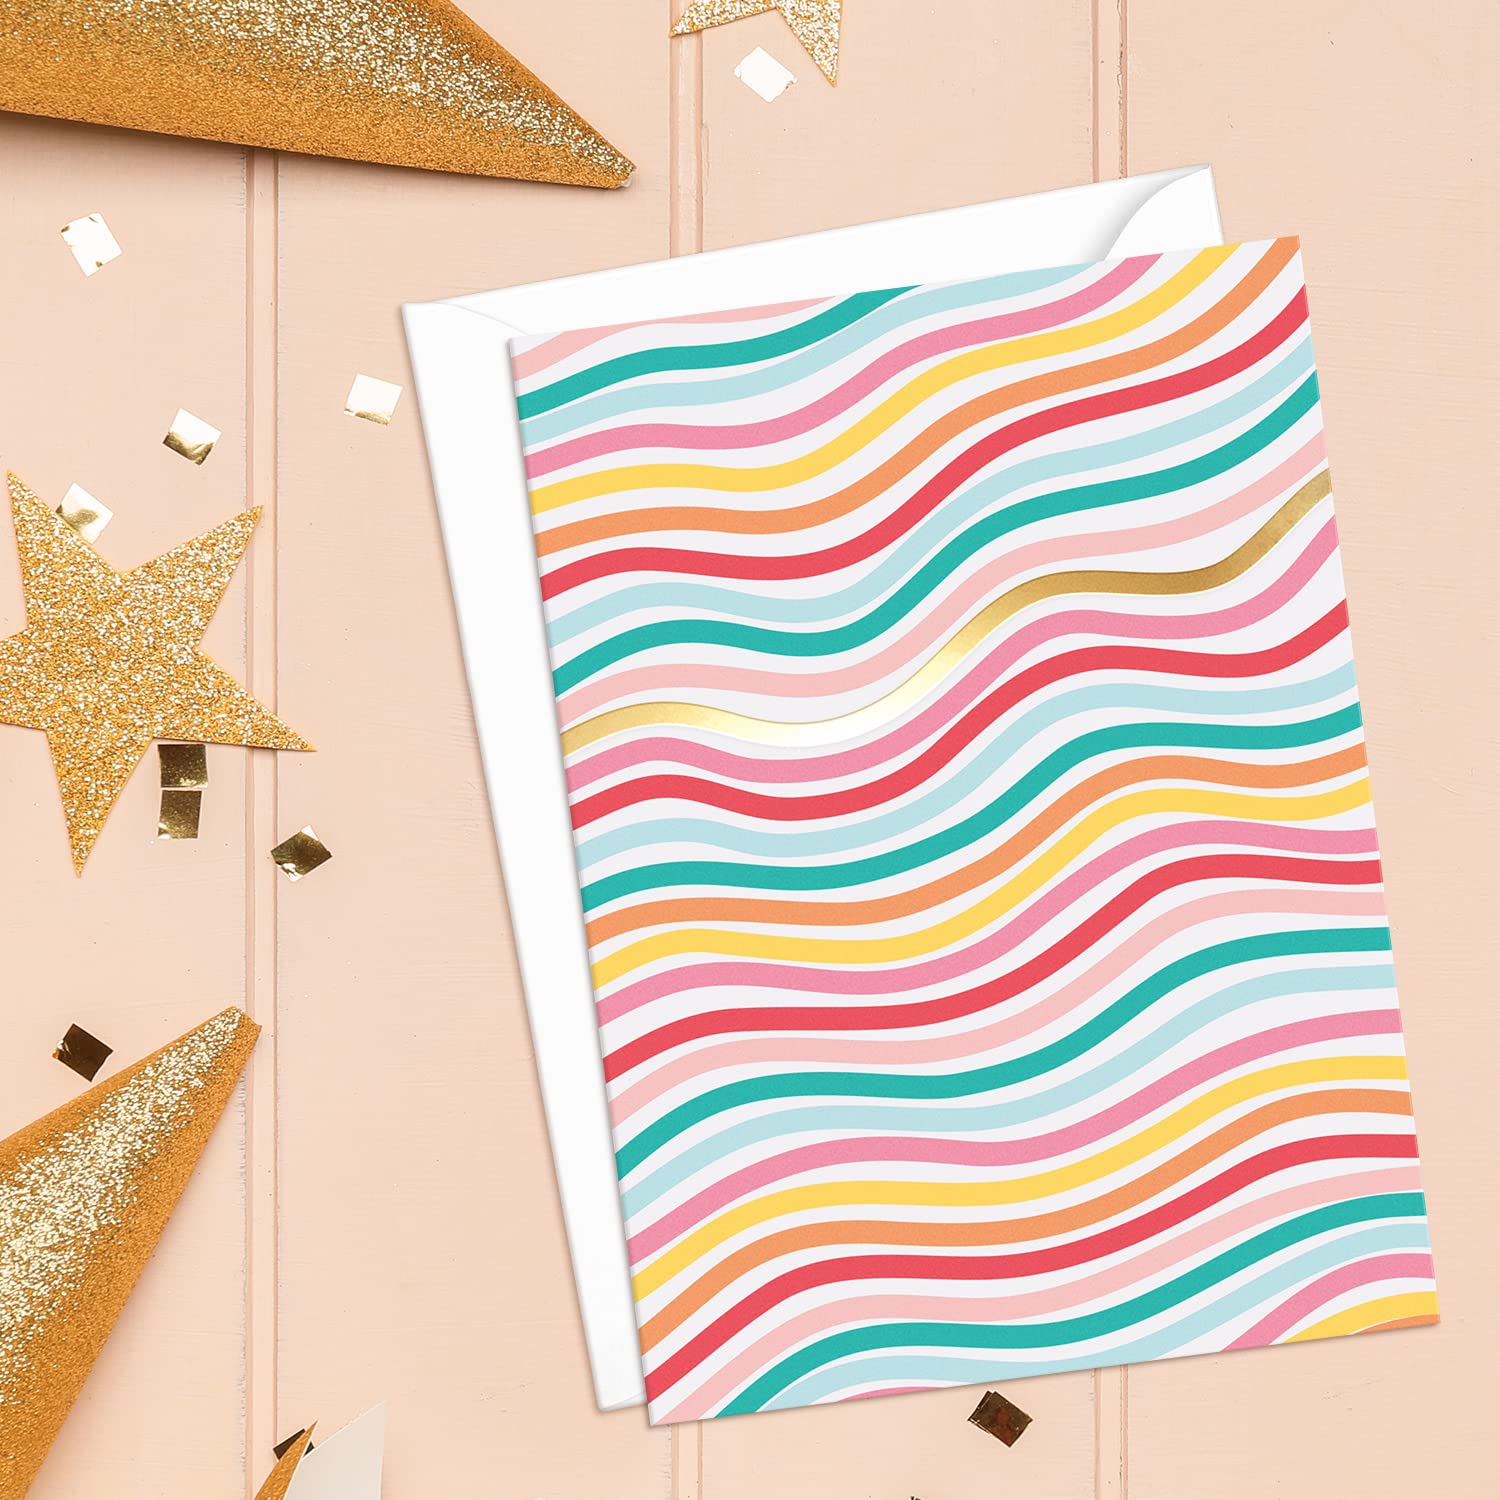 Blank Cards with Envelopes - 48 Striped Gold Foil Blank Note Cards with Envelopes – 6 Assorted Cards for All Occasions! Blank Notecards Stationary Set for Personalized Greeting Cards-4x5.5